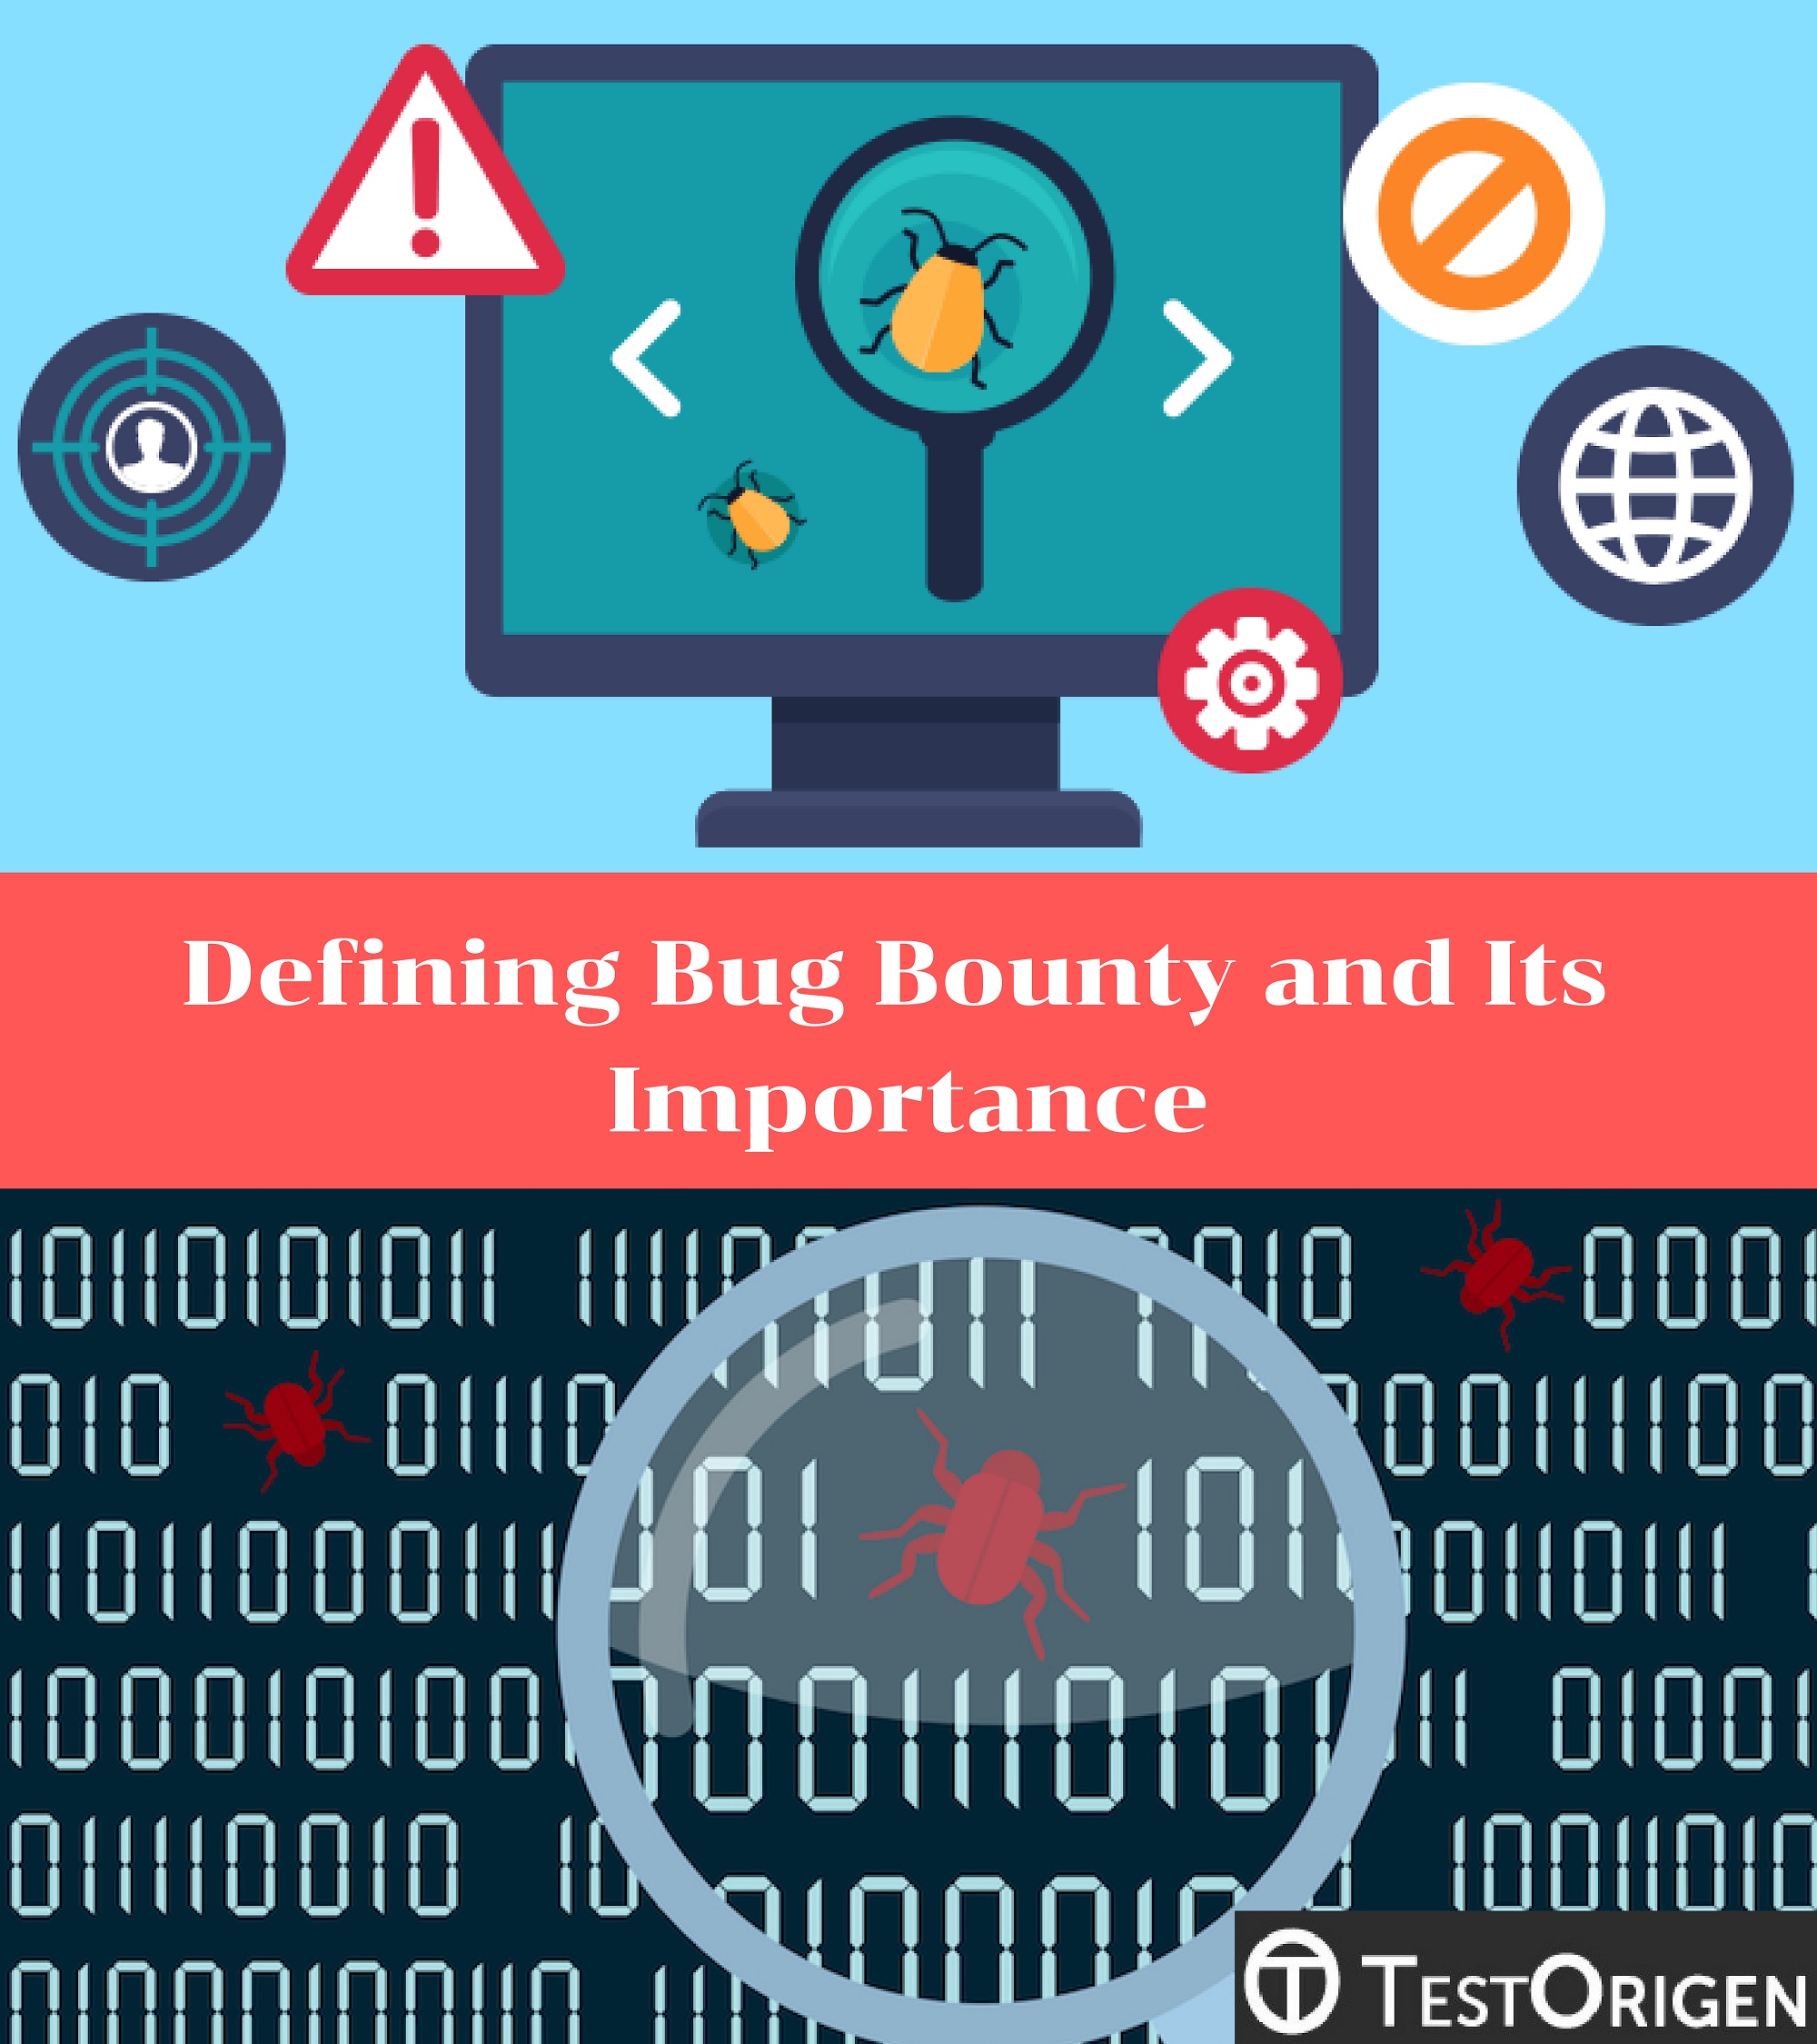 Defining Bug Bounty and Its Importance